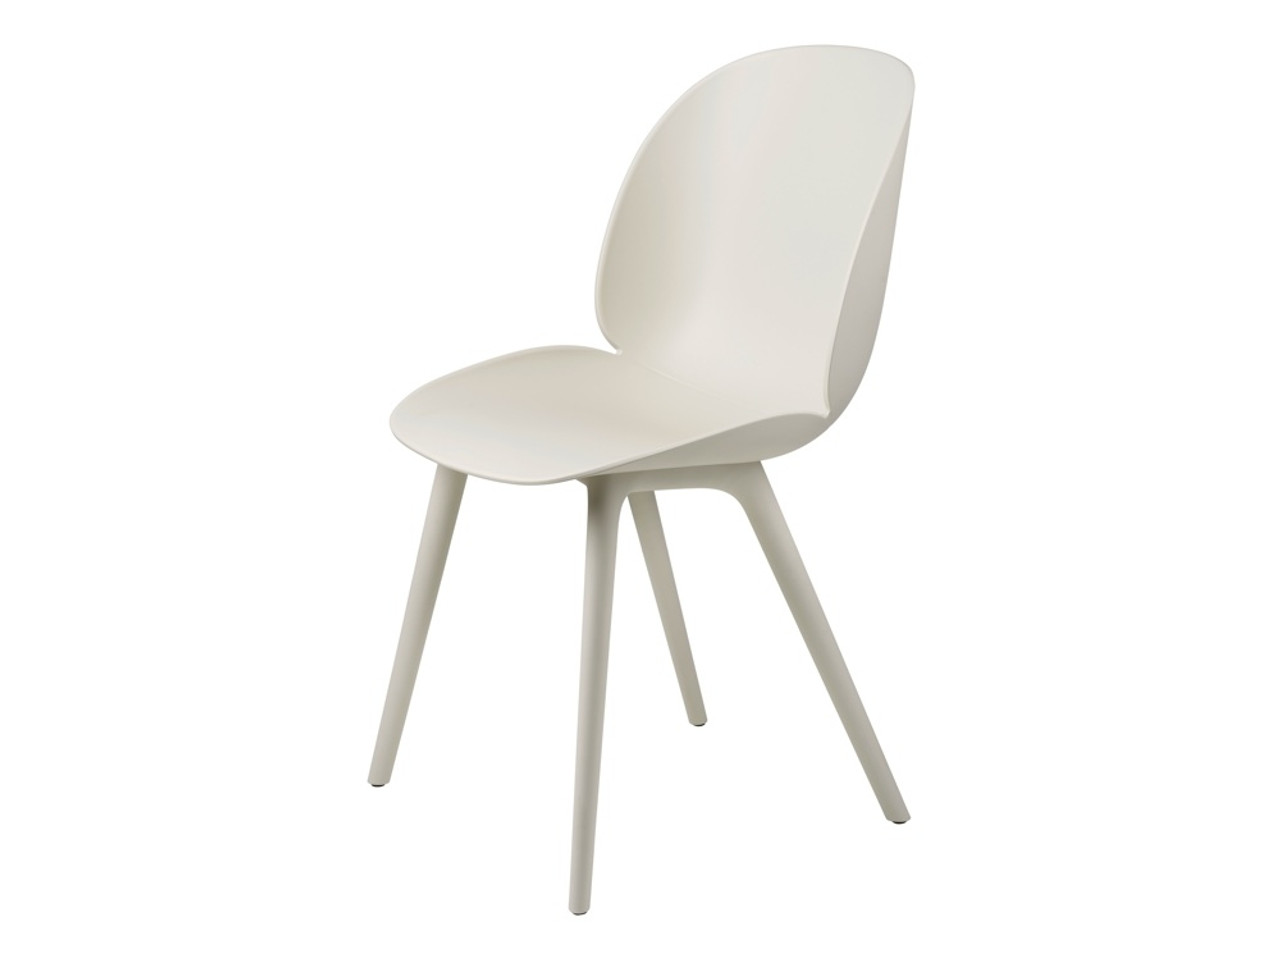 Beetle Outdoor Dining Chair - Alabaster White - Set of 4